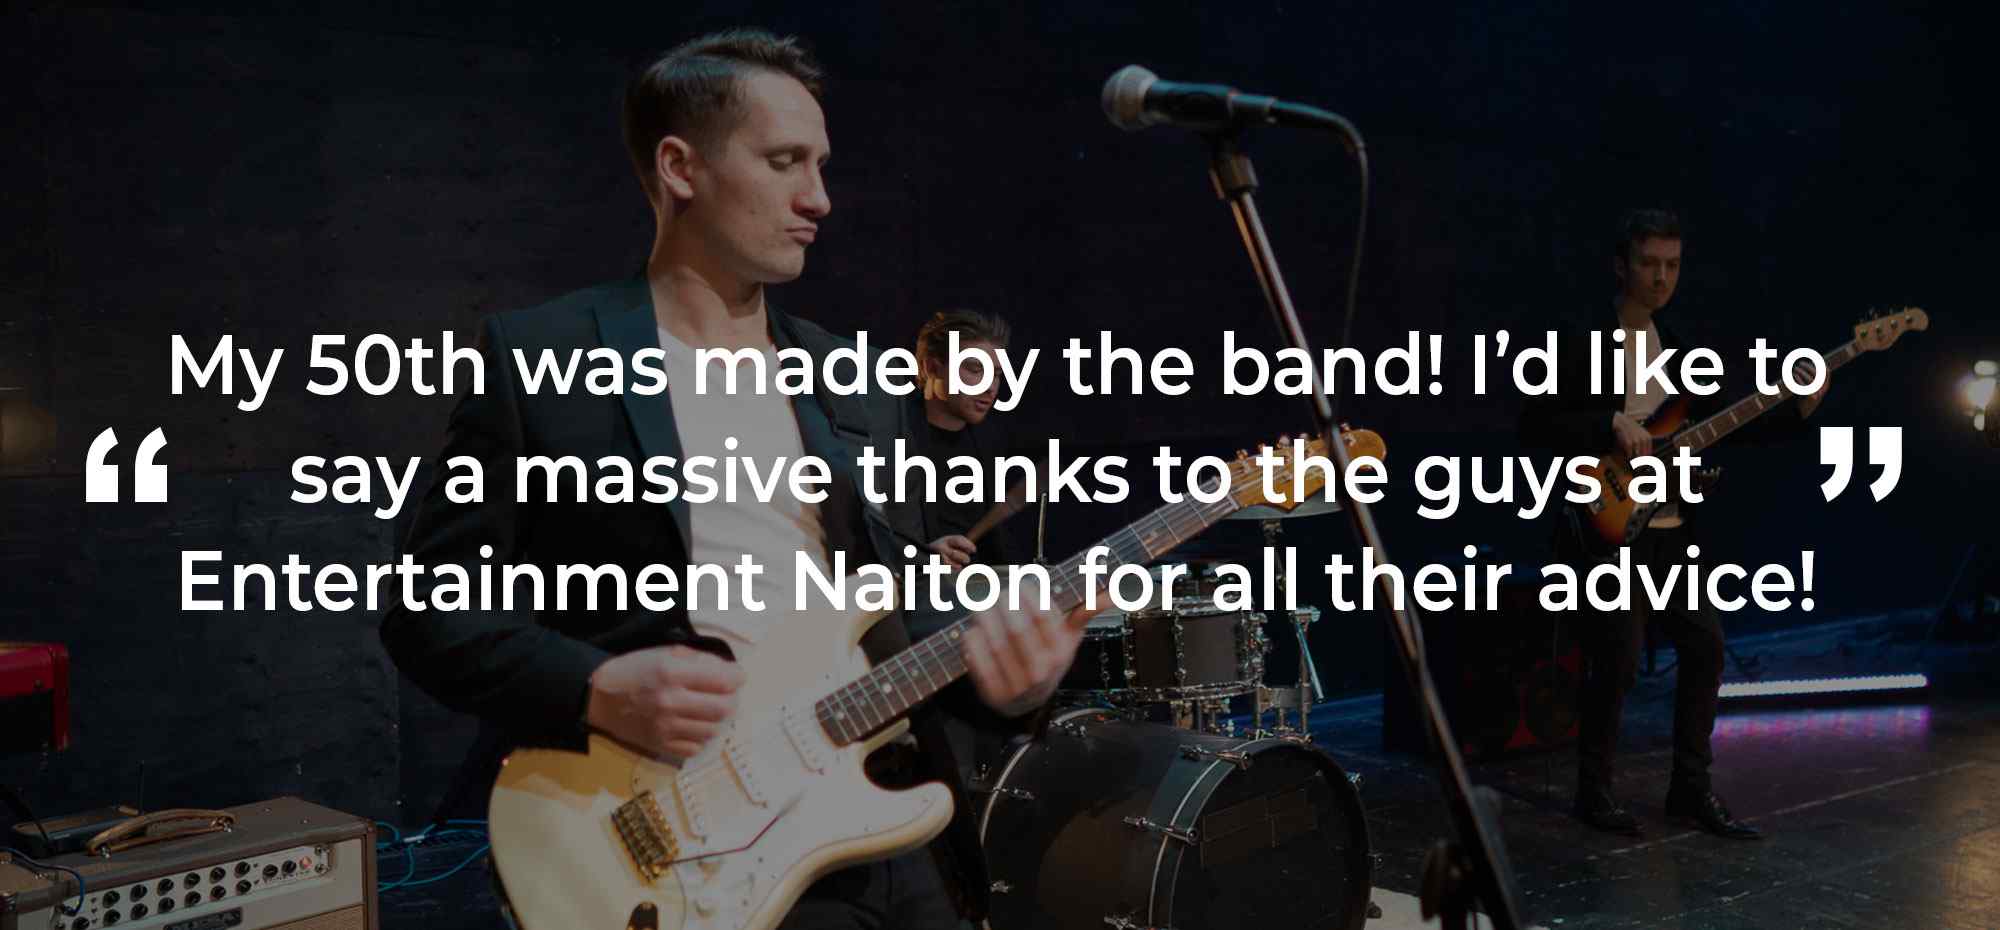 Client Review of a Party Band Wiltshire